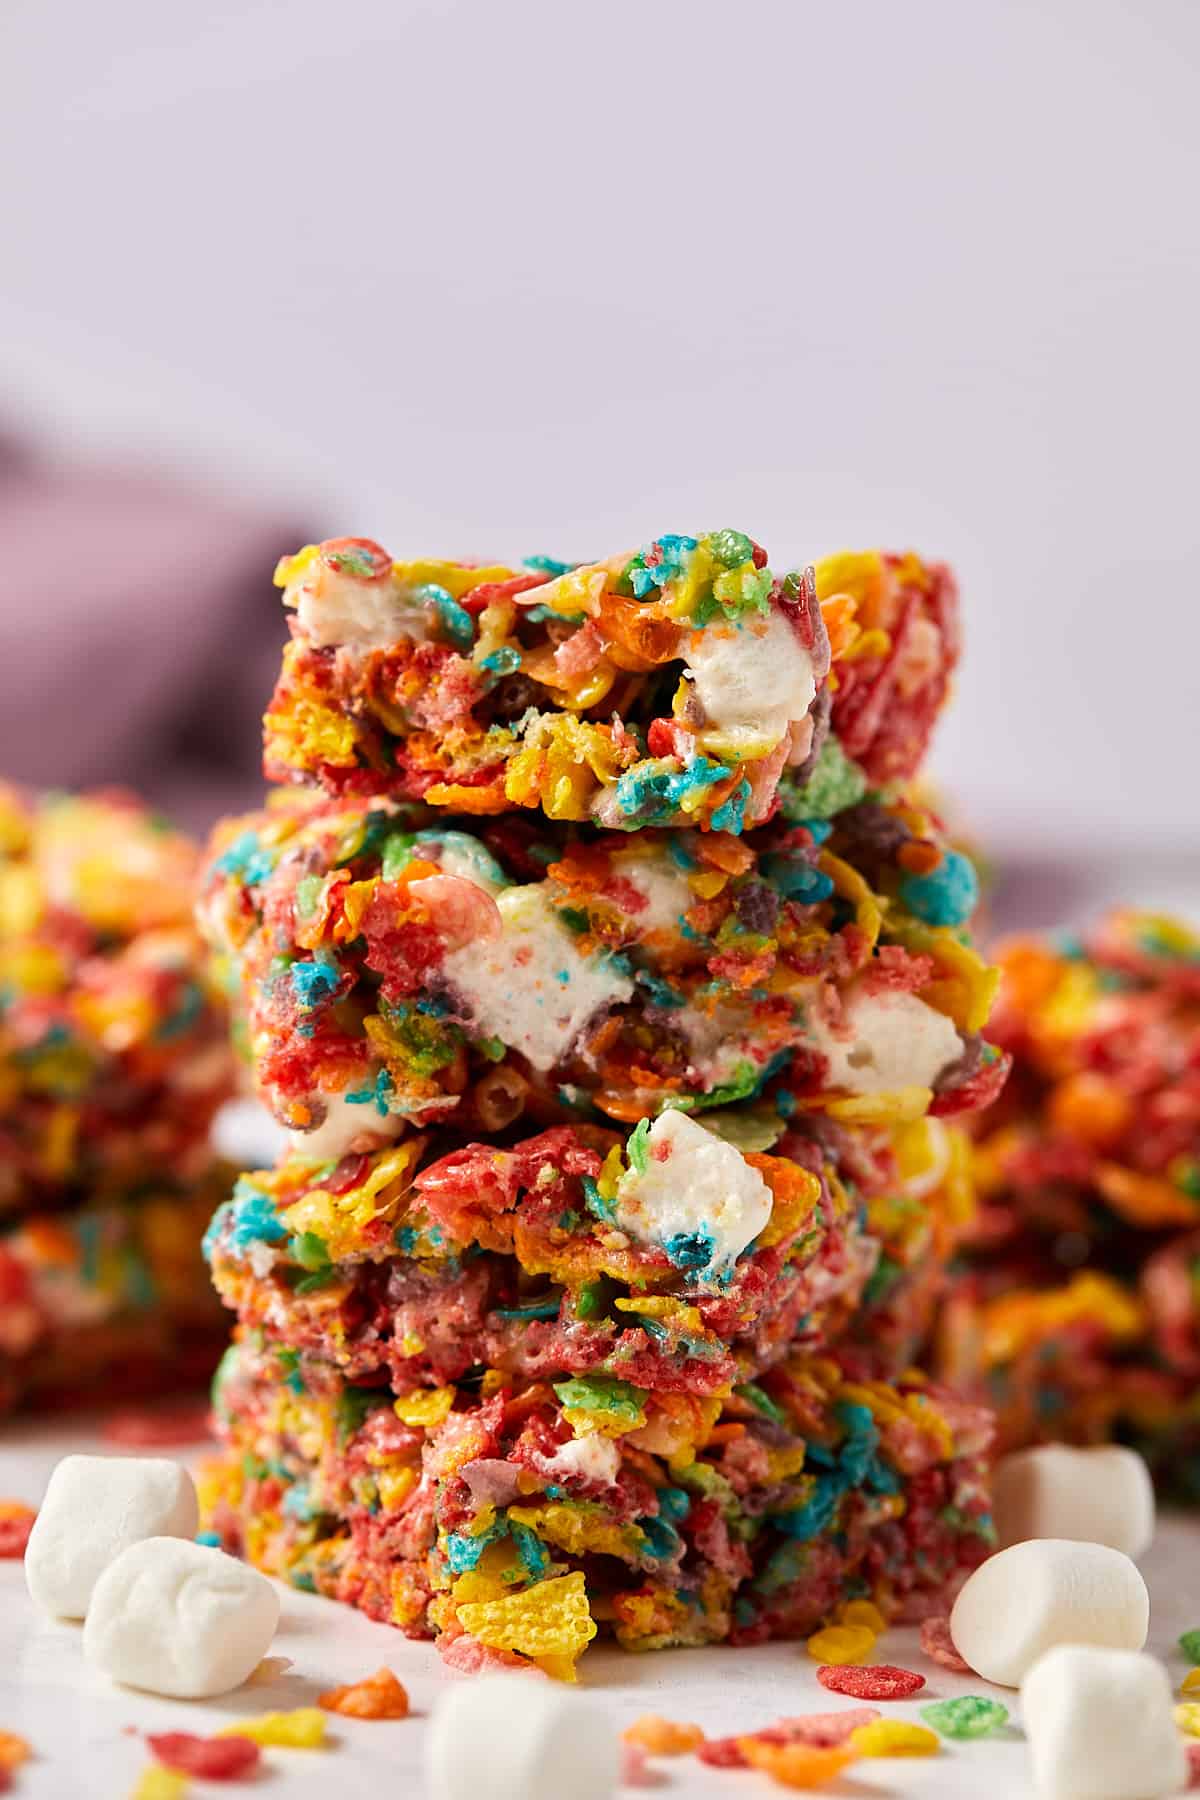 A close up view of a stack of Fruity Pebbles Marshmallow treats.